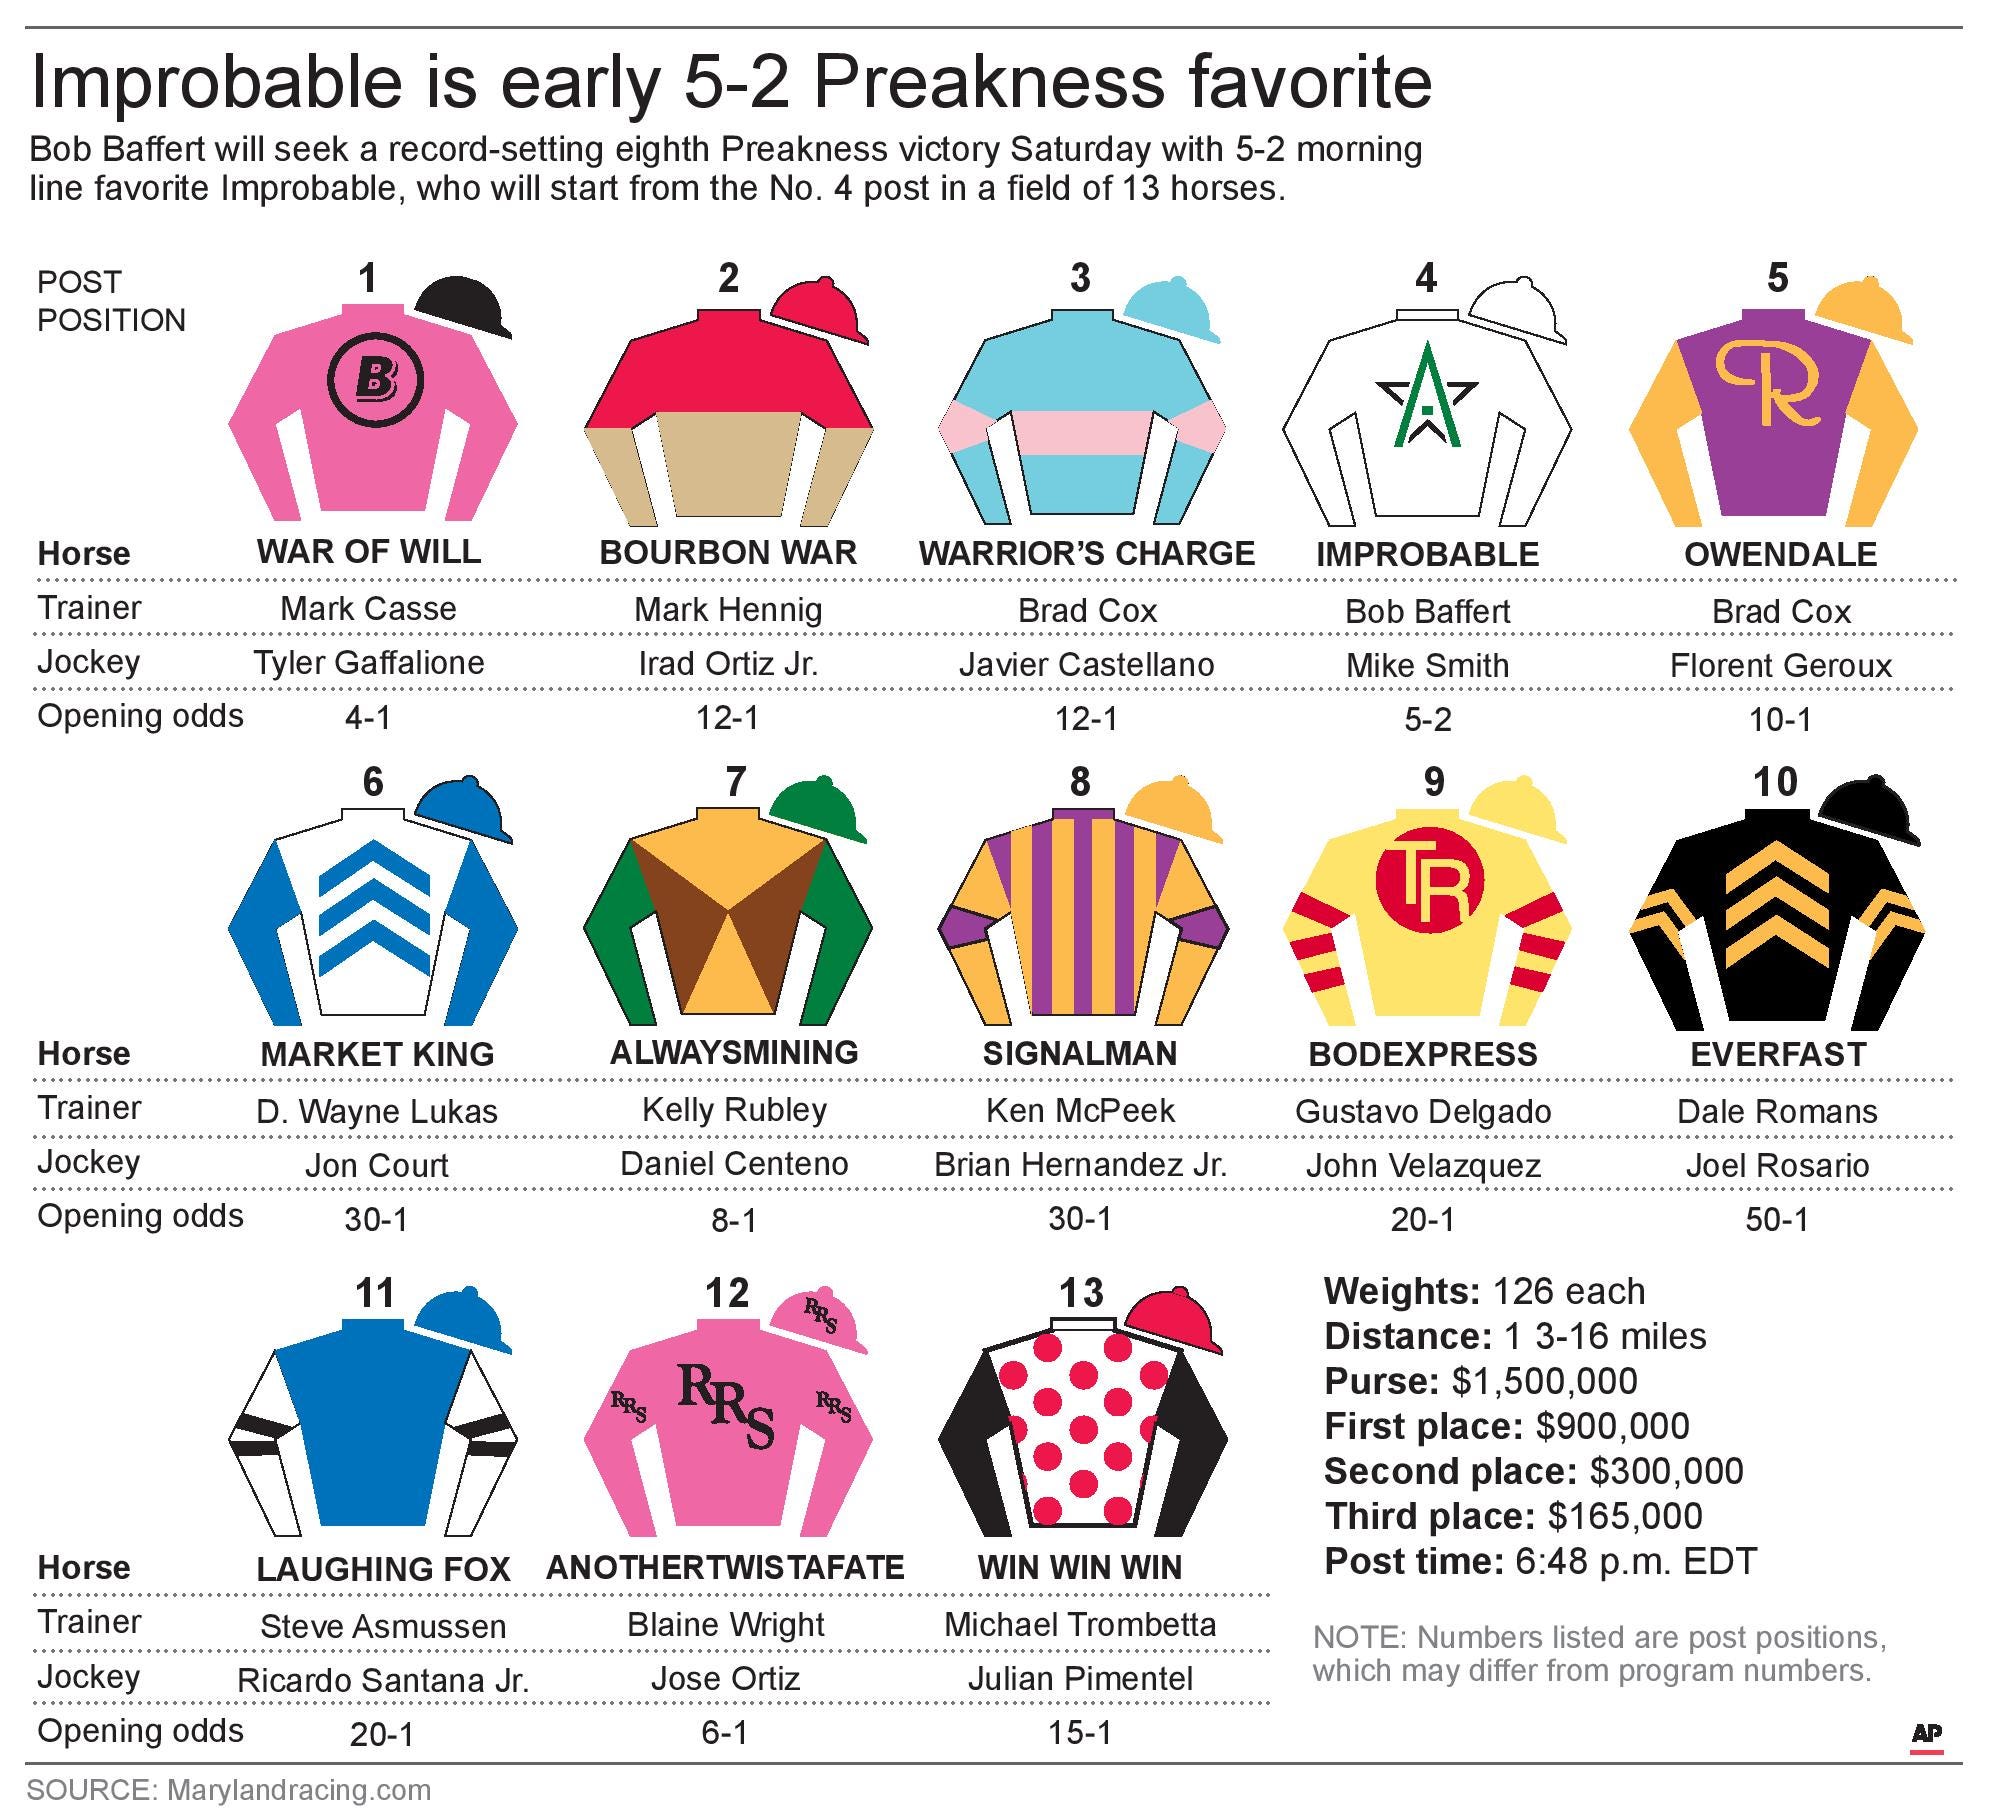 Preakness 2019 Printable list of horses, post positions, odds, more